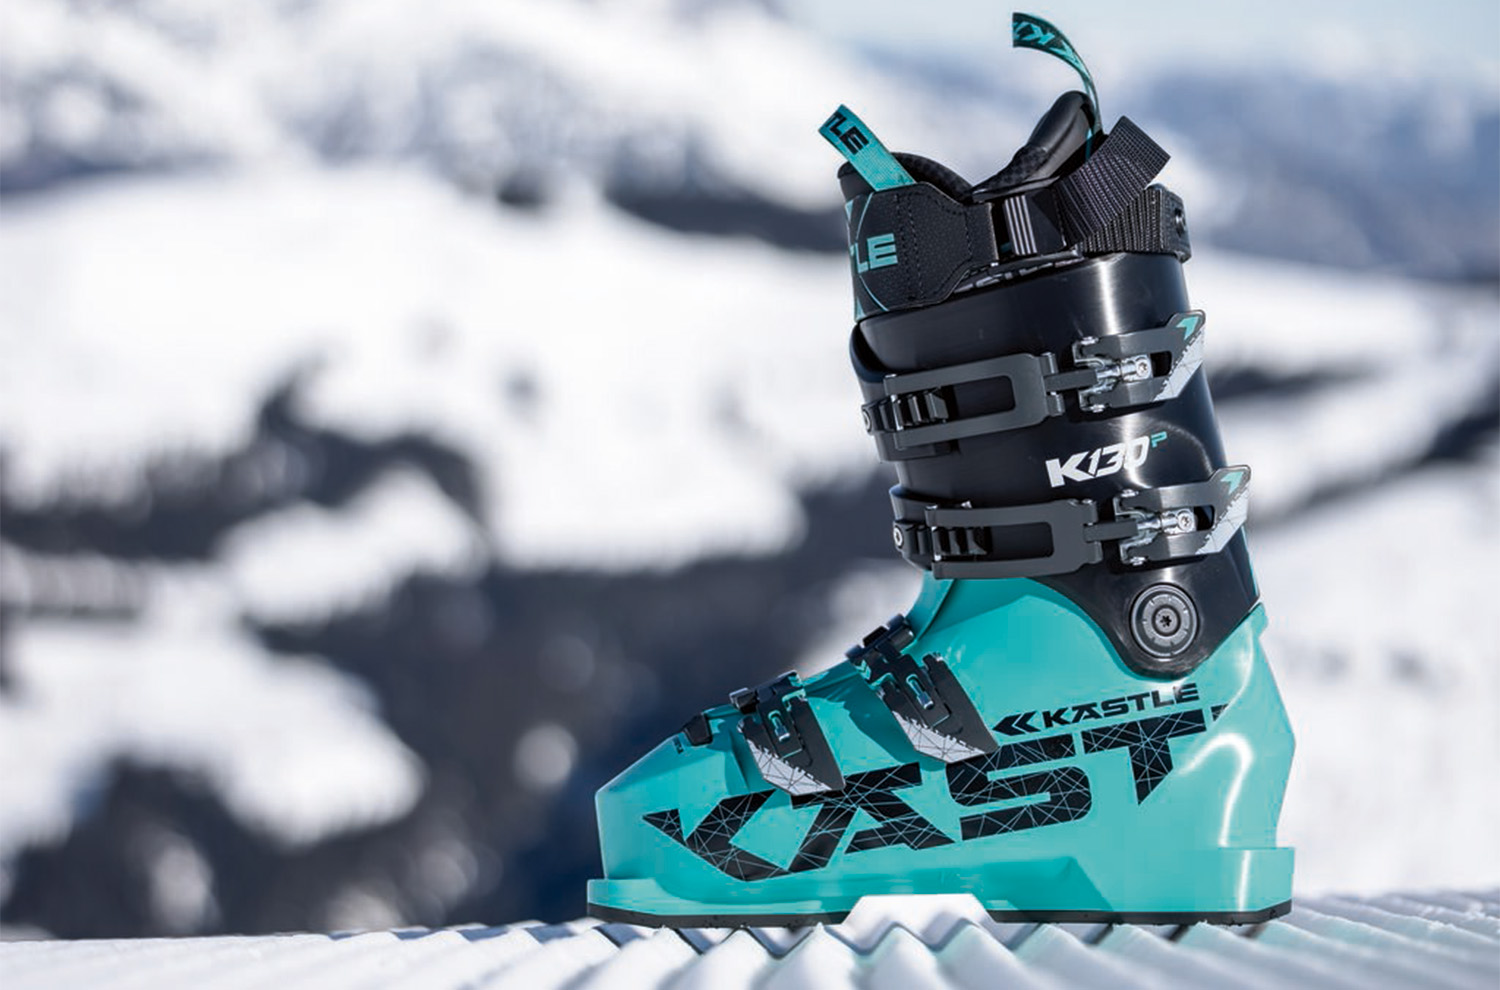 For decades, Kästle has been making high-end skis for everything from racing to Nordic and skimo. But what sparked their recent launch into the ski boot category? It’s far from a simple process, so on GEAR:30, we talked to Alessandro Speranzoni, Kästle’s global ski boot product engineer, and Alex Pritzlaff, their U.S. product manager, to get all the details on the backstory and latest collection of Kästle ski boots.